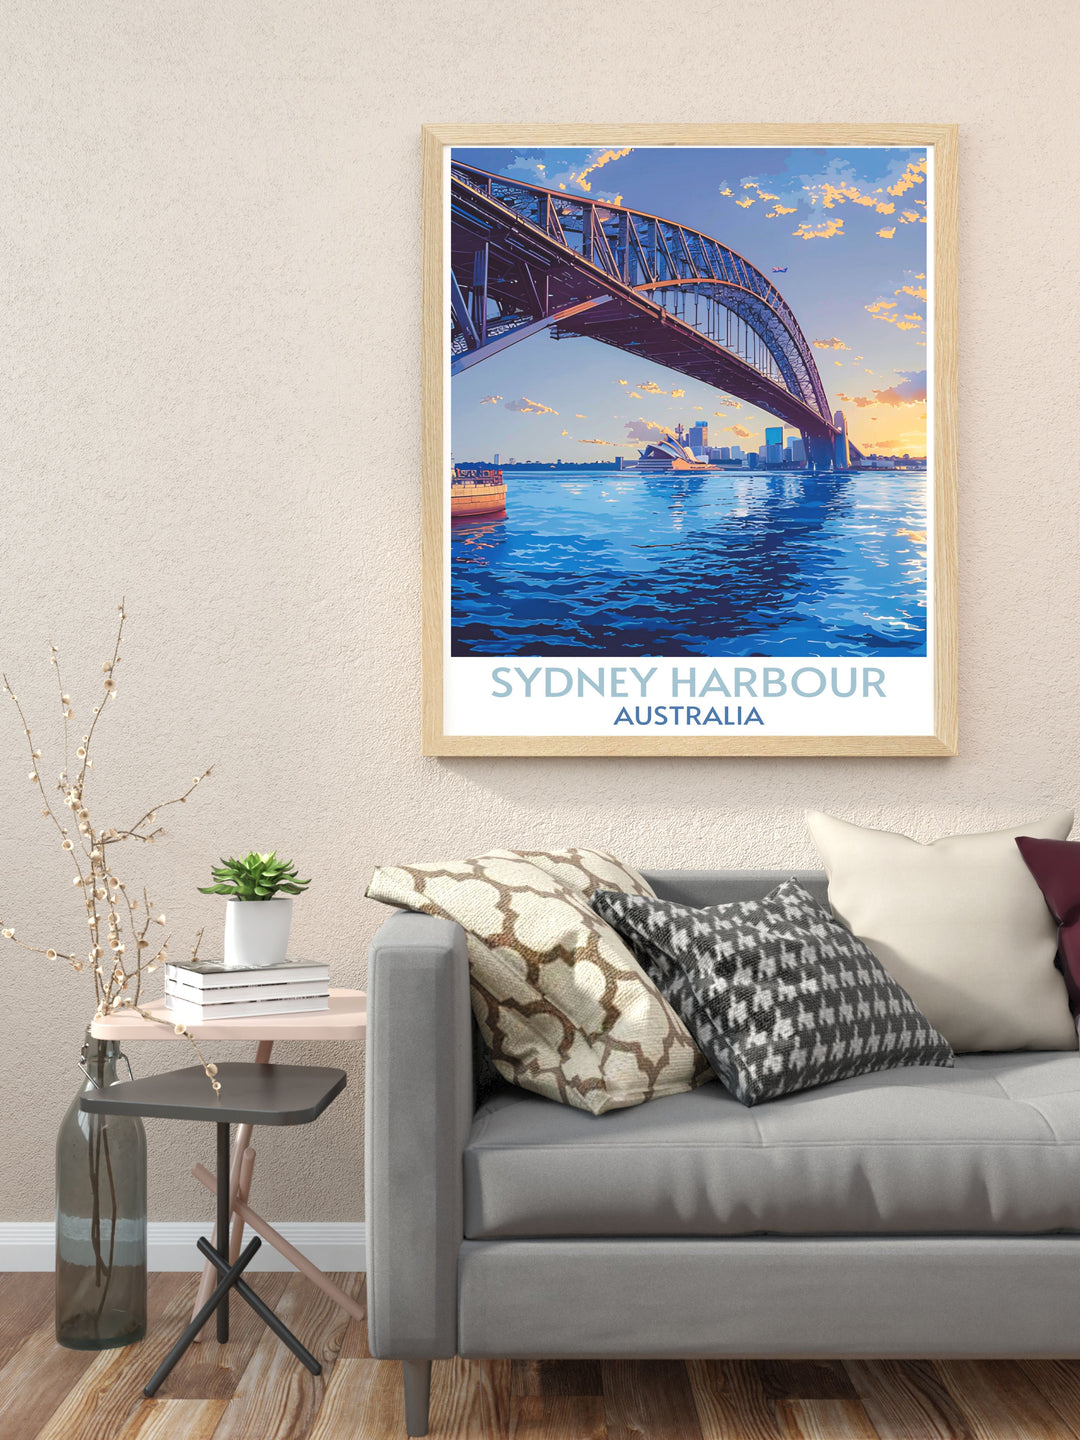 Detailed poster of Sydneys city lights at night, with views over the illuminated harbour and bridge.